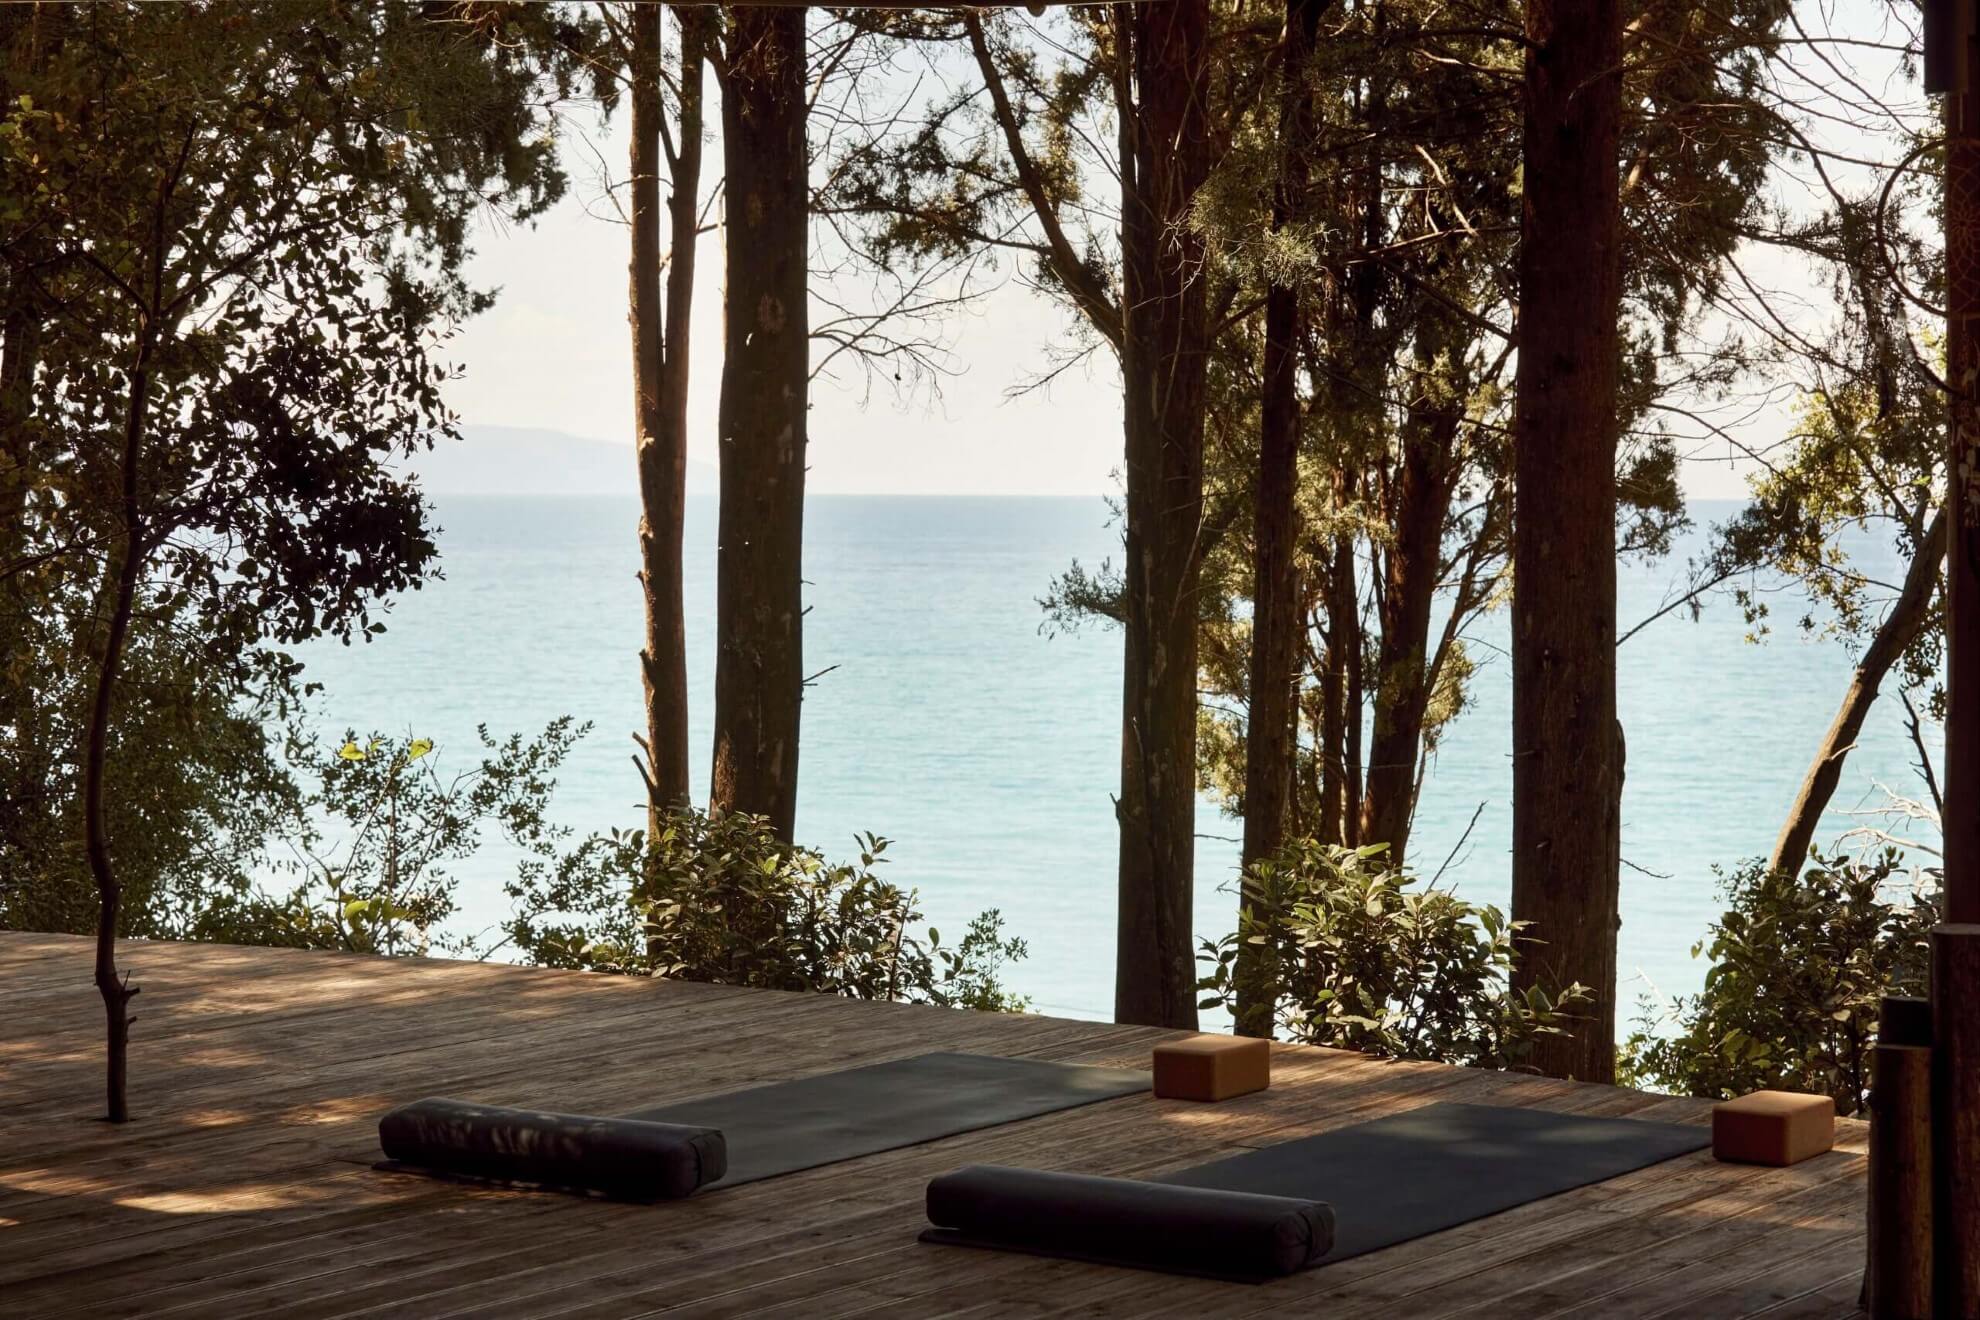 yoga mattresses on a wooden patio